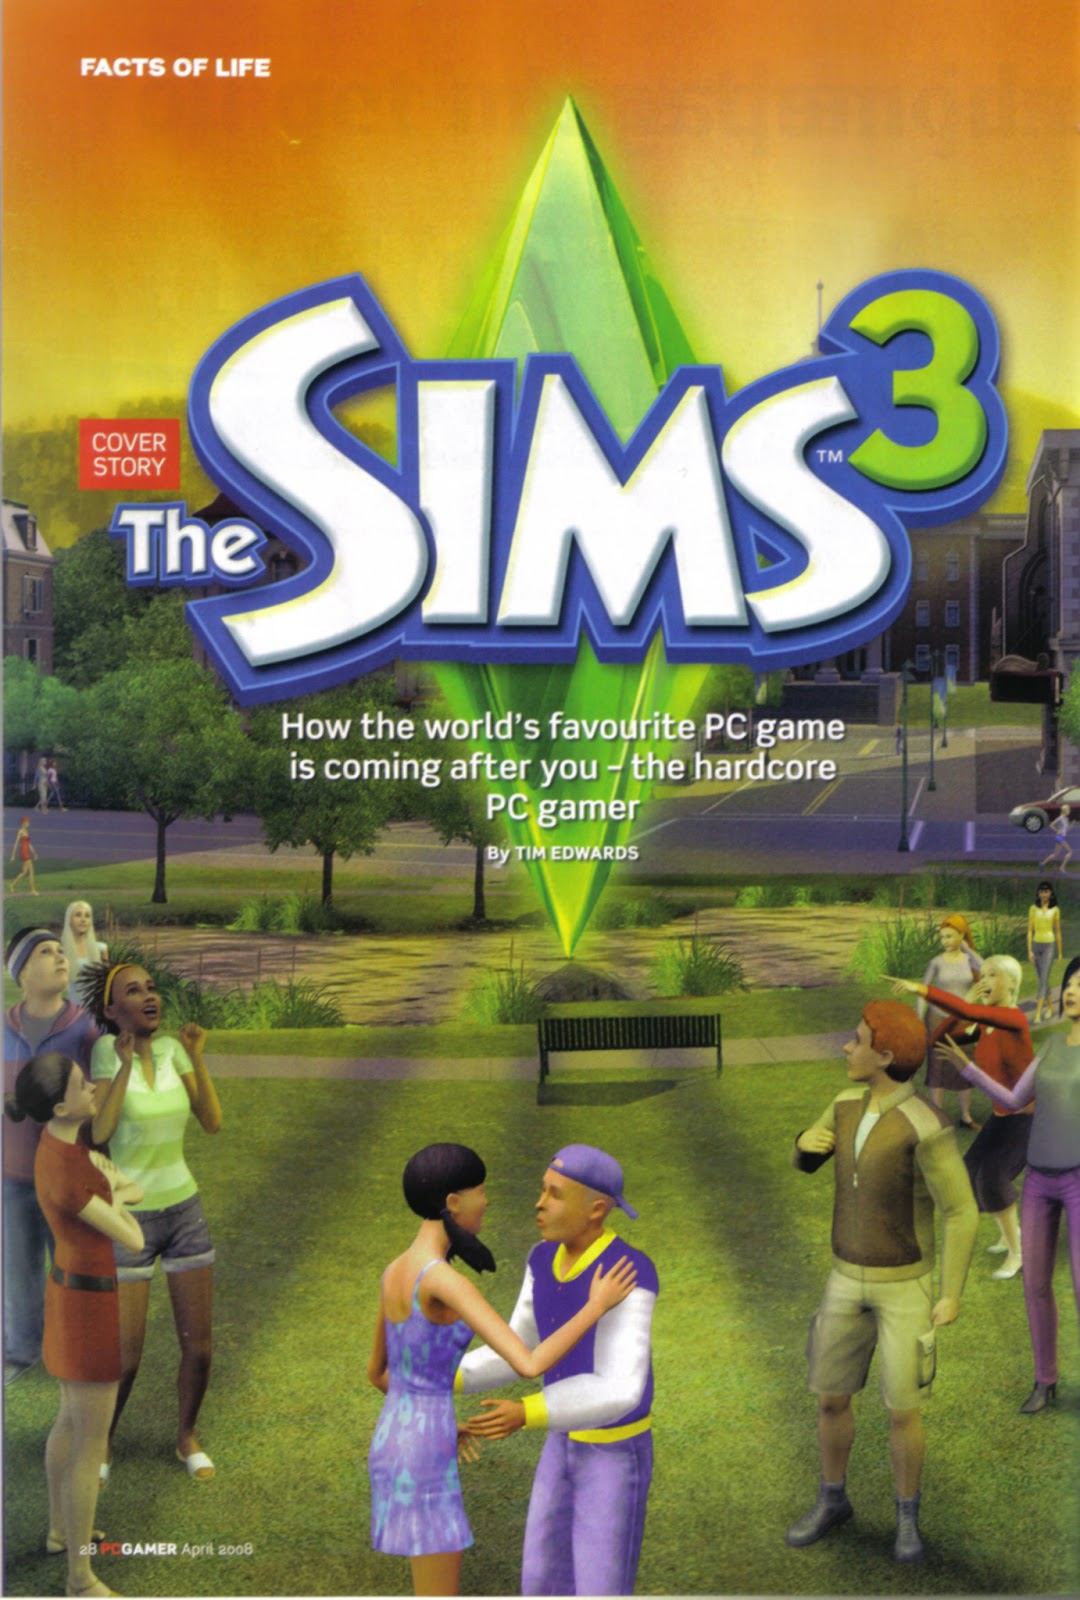 free game 7 sins for pc full version sims